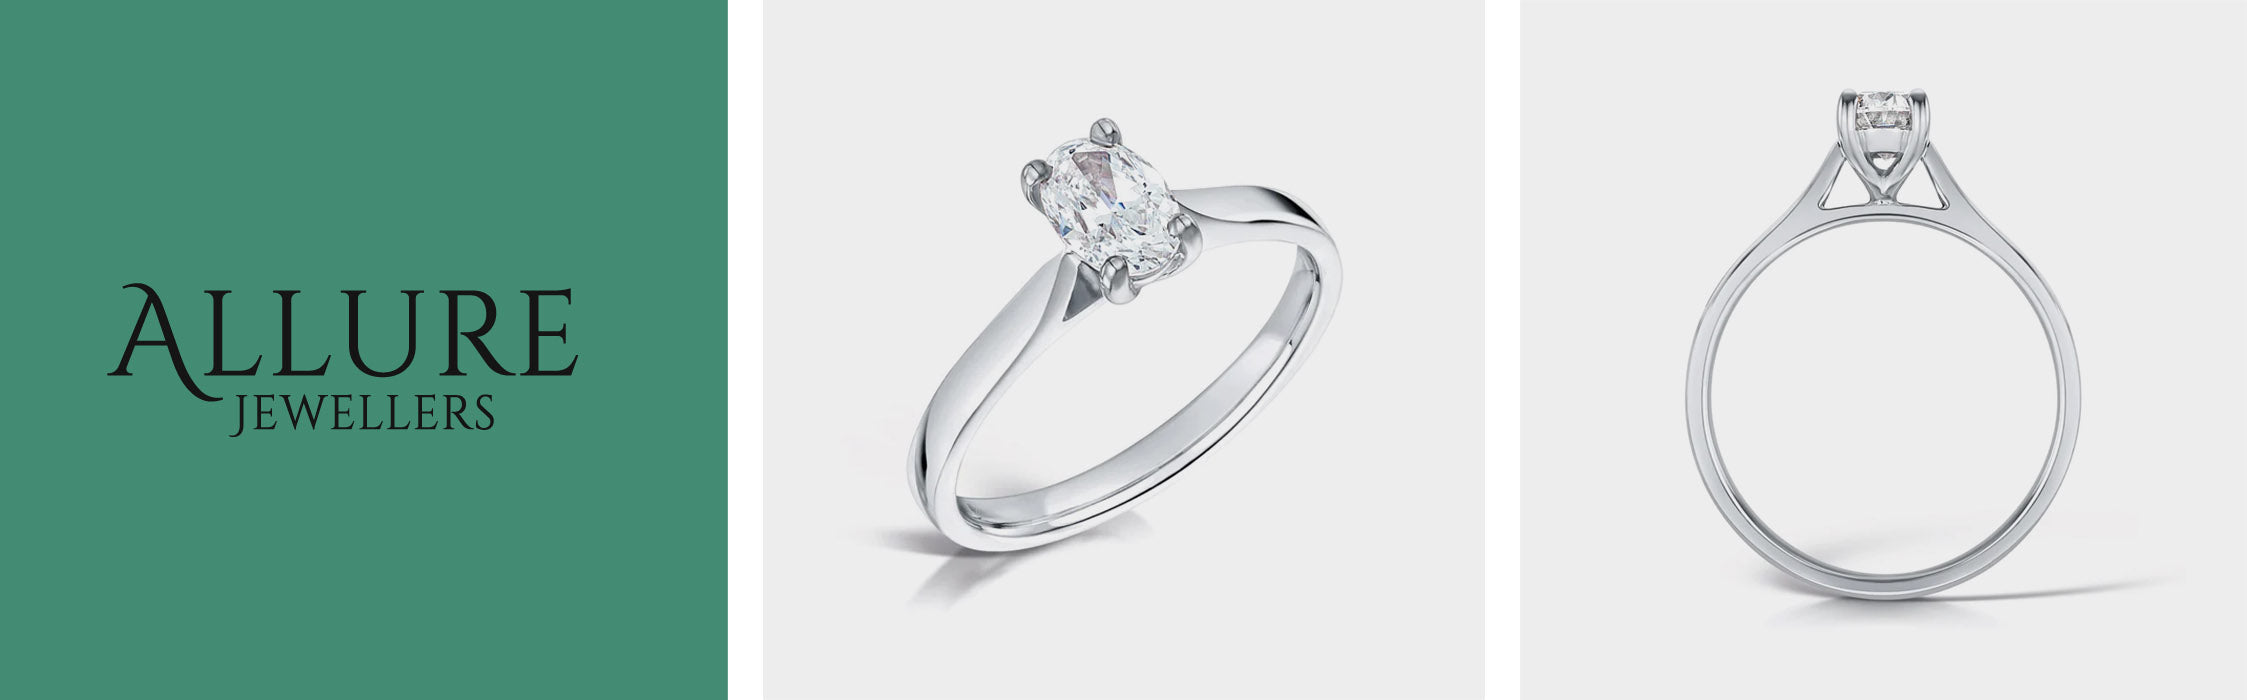 Oval cut engagement rings diamond at Allure Jewellers 